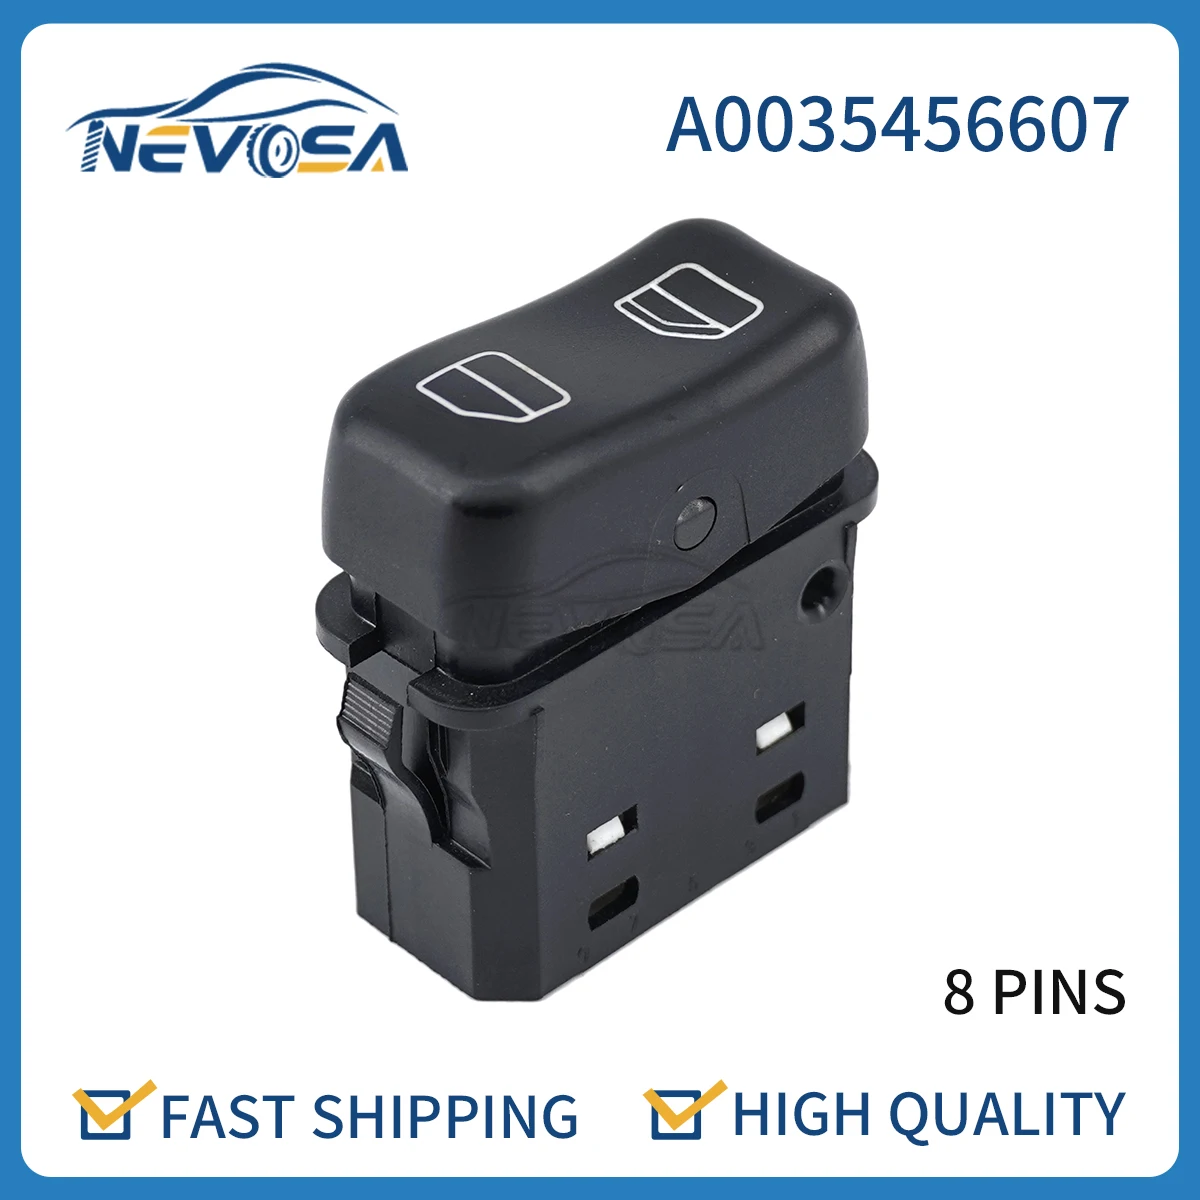 

Nevosa A0035456607 Muti-function Rock Switch Electric Window Regulator Button For Mercedes-Benz Truck Axor Atego Actros MP2 MP3